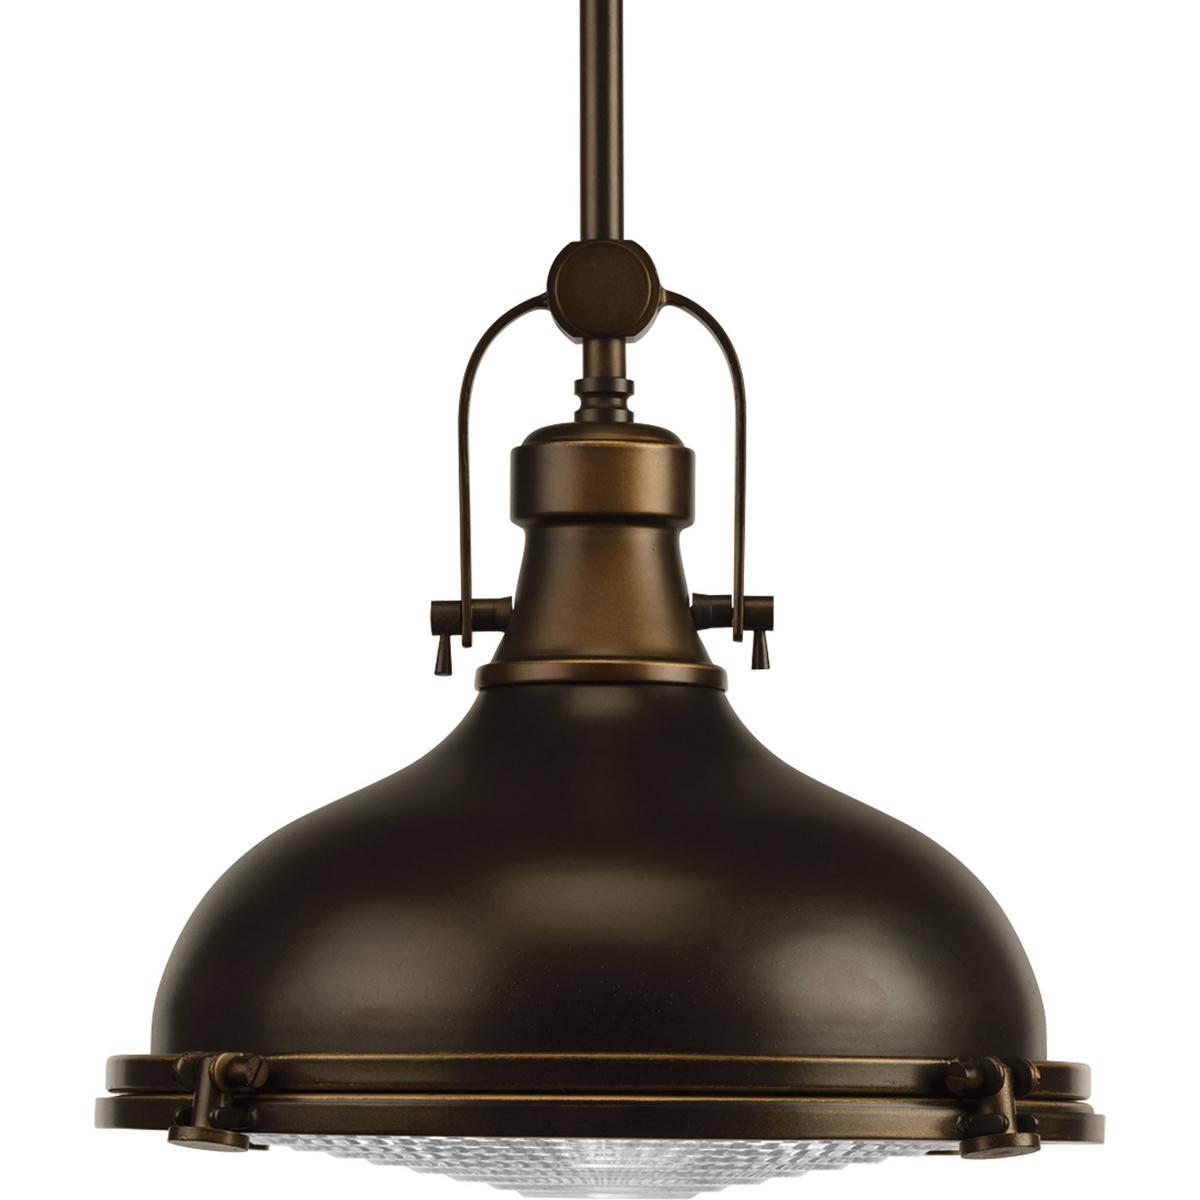 Hubbell P5188-10830K9 The one-light 12" pendant features industrial roots in both form and function. The Oil Rubbed Bronze finish highlight the high-quality prismatic glass which adds to the historical aesthetic. Antique style fixture includes a hinge-locking nautical design. 